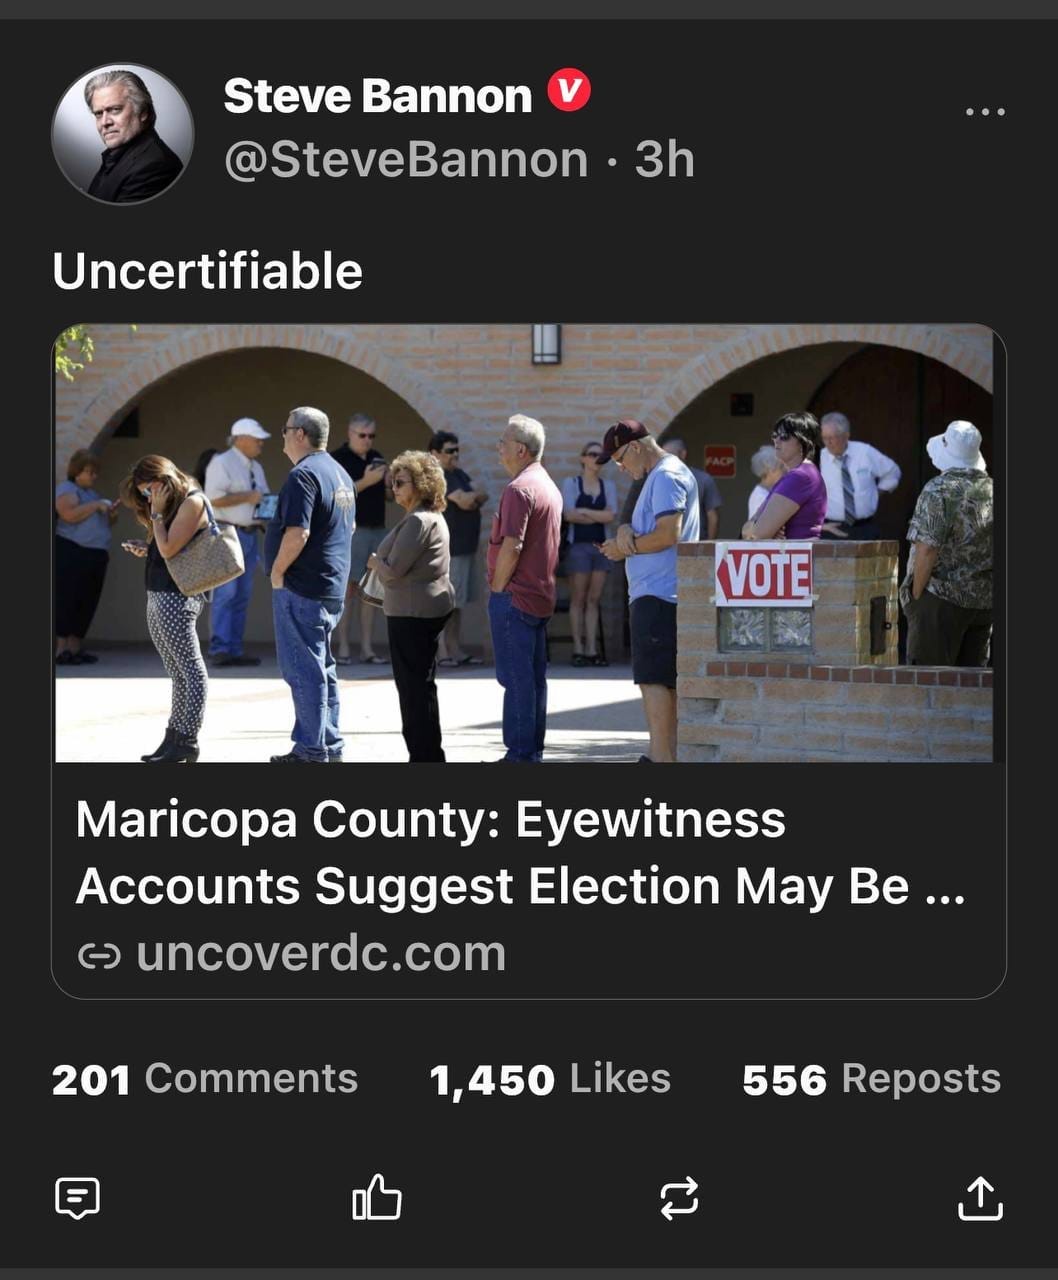 May be an image of 13 people, people standing and text that says 'Steve Bannon @SteveBannon 3h Uncertifiable VOTE Maricopa County: Eyewitness Accounts Suggest Election May Be... ૯ uncoverdc.com 201 Comments 1,450 Likes 556 Reposts'